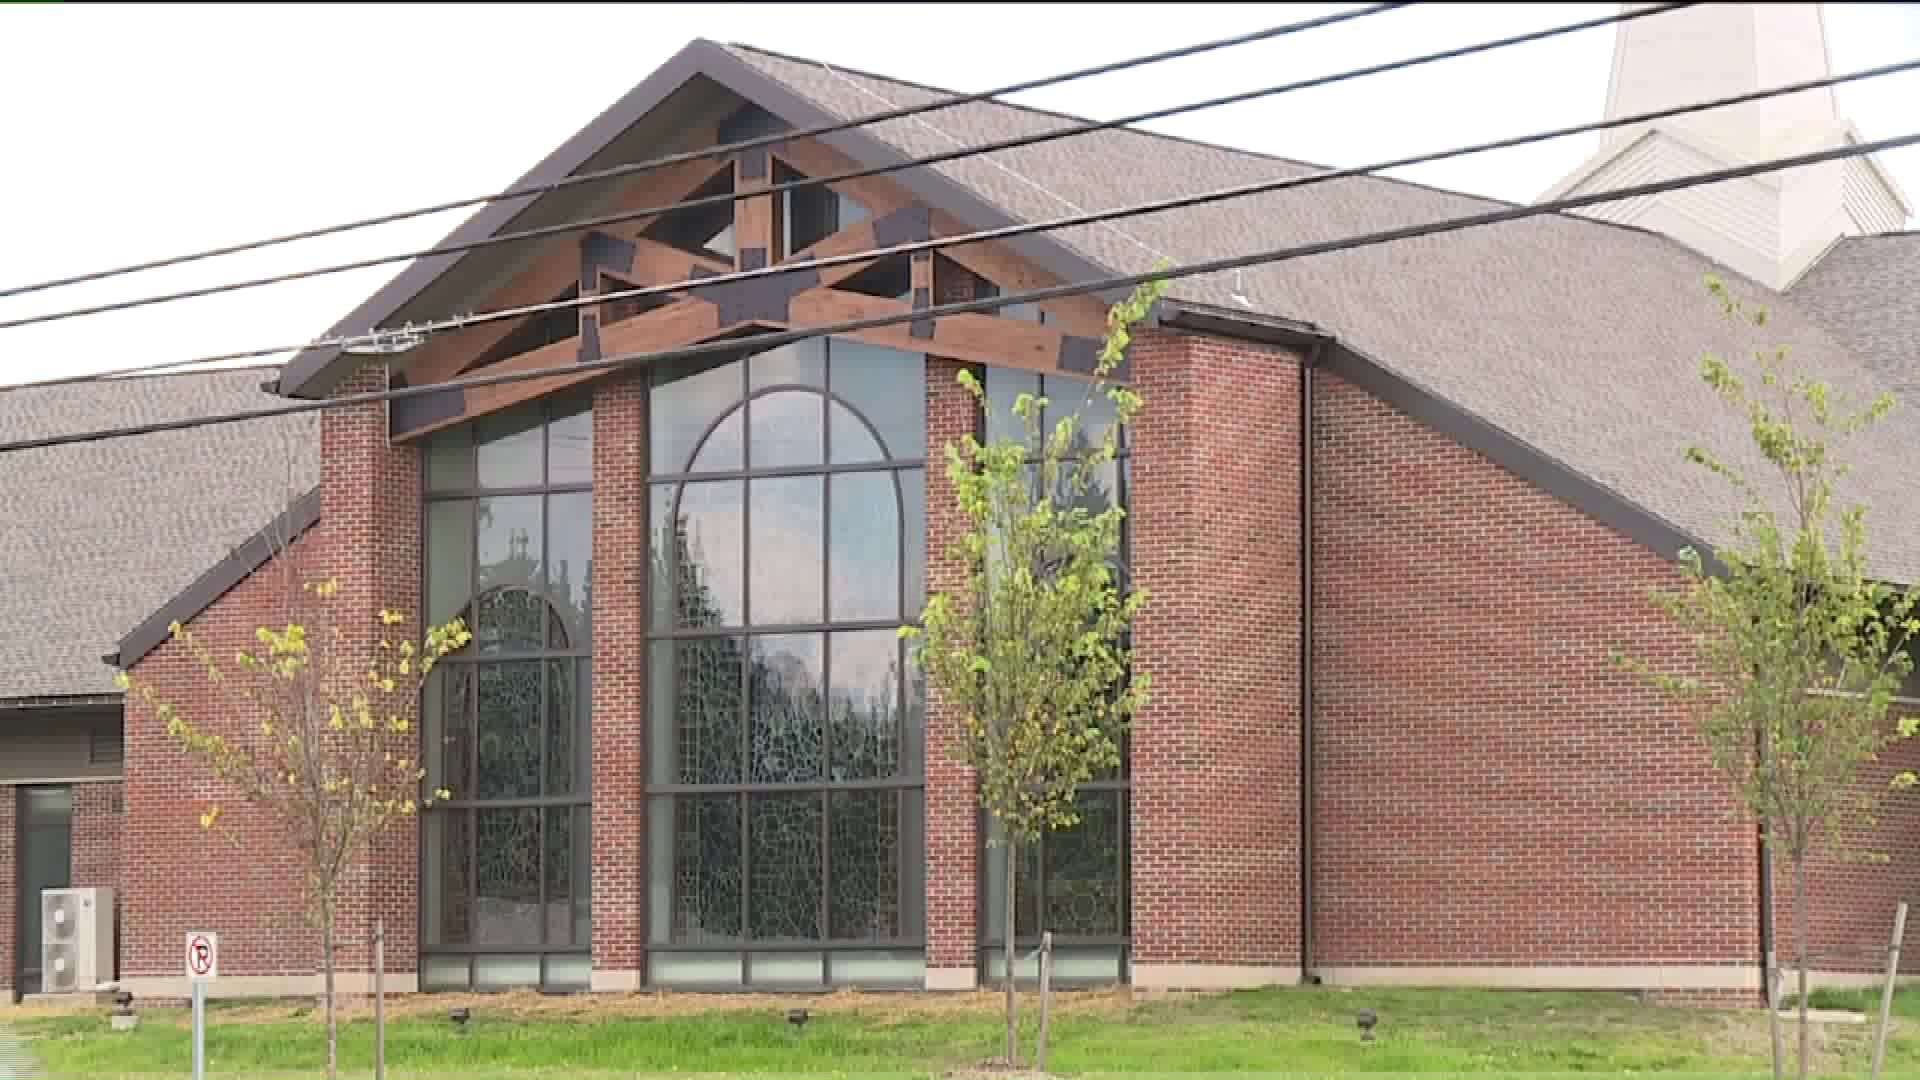 New Home for Growing Parish